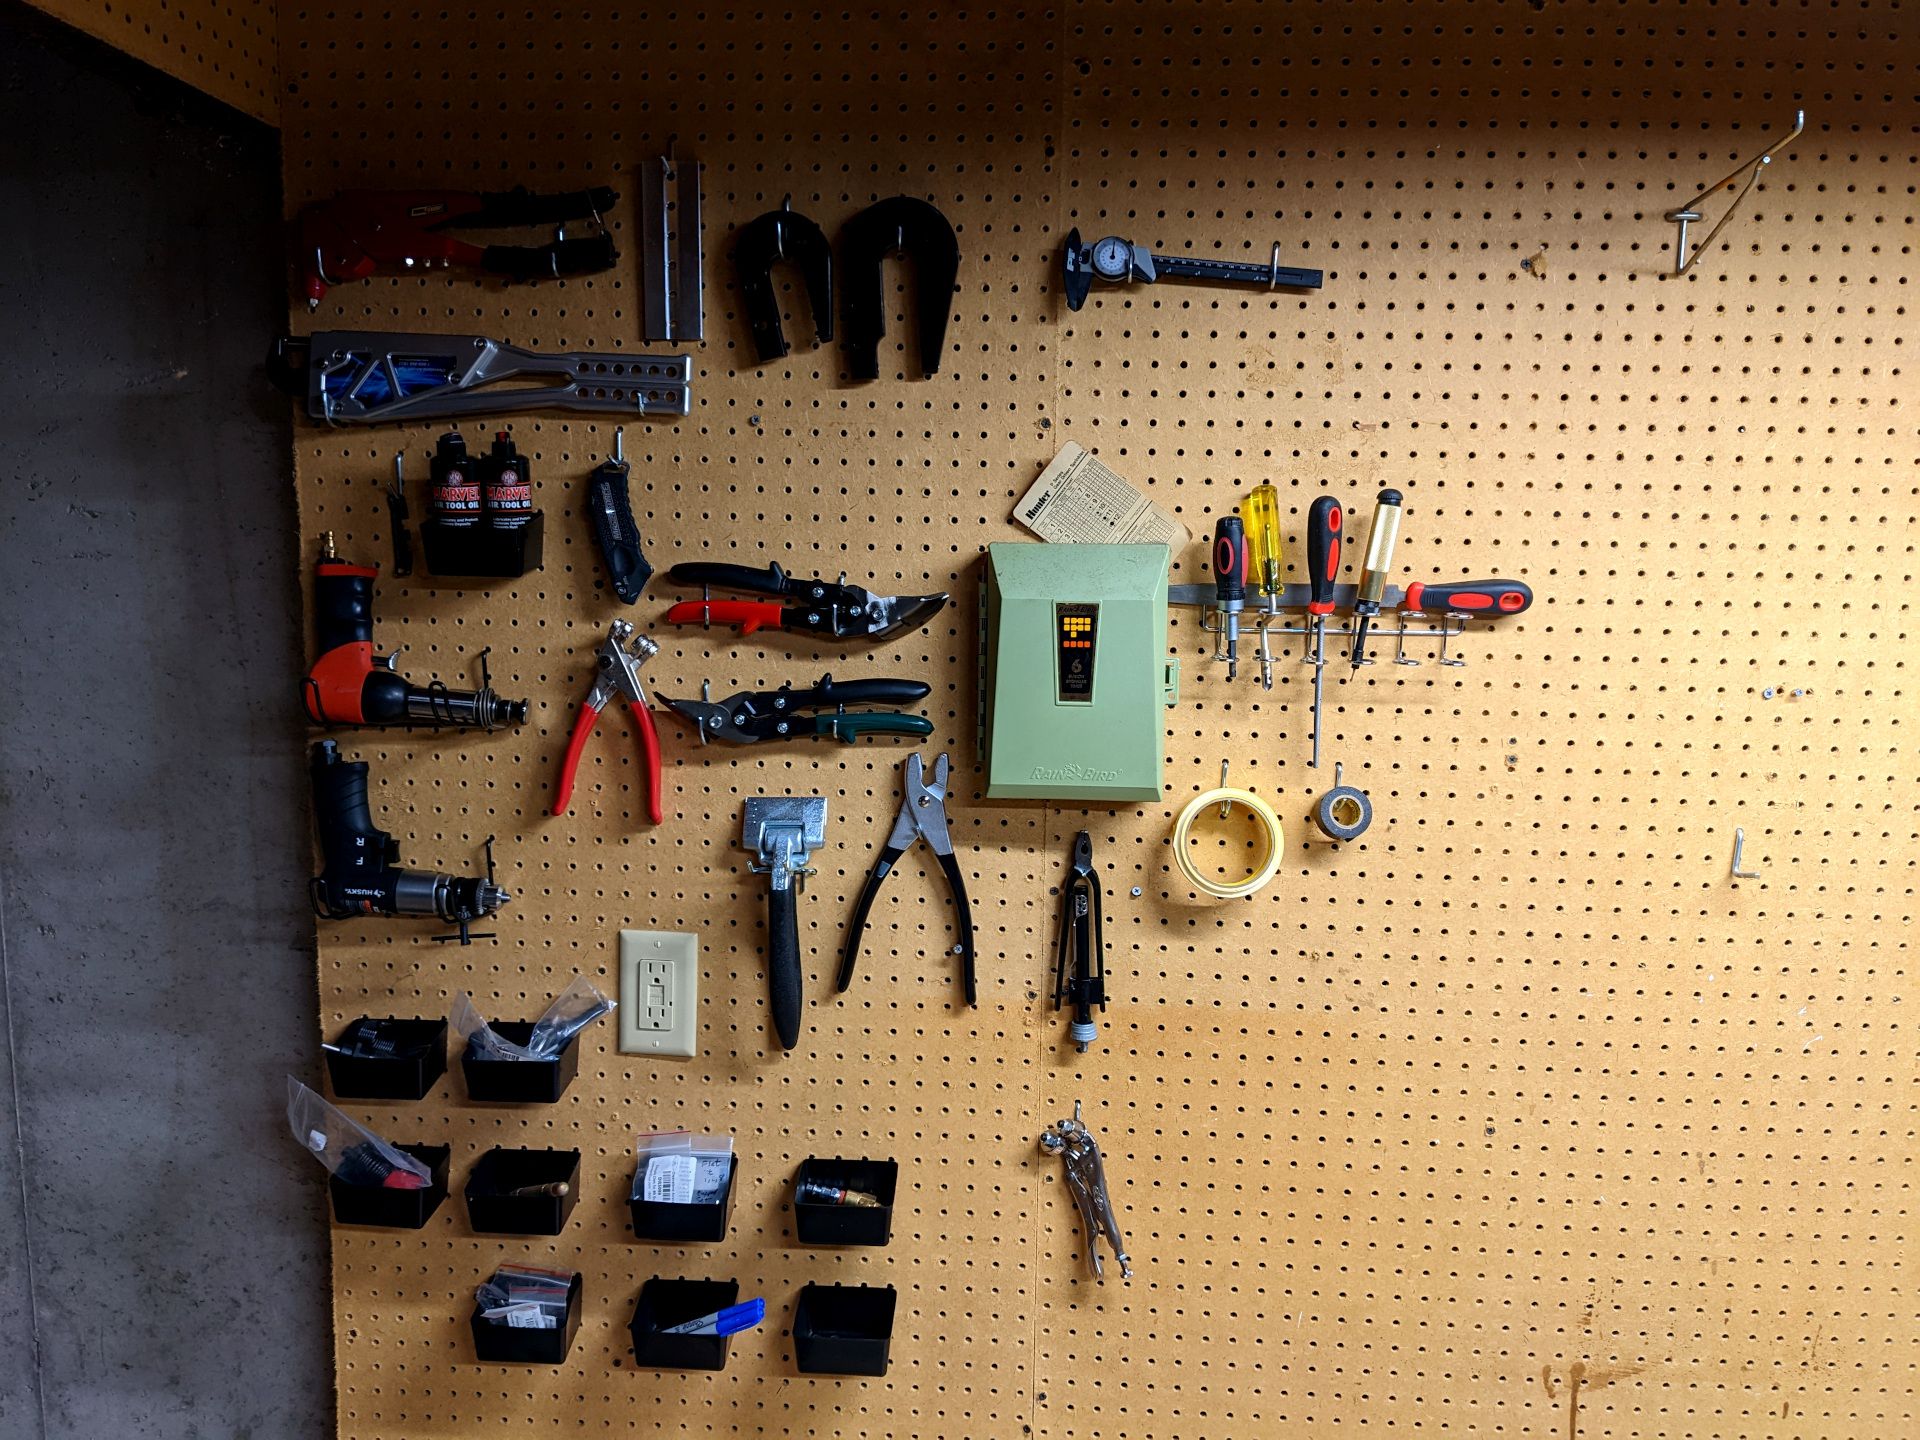 A section of the pegboard with various tools hung up